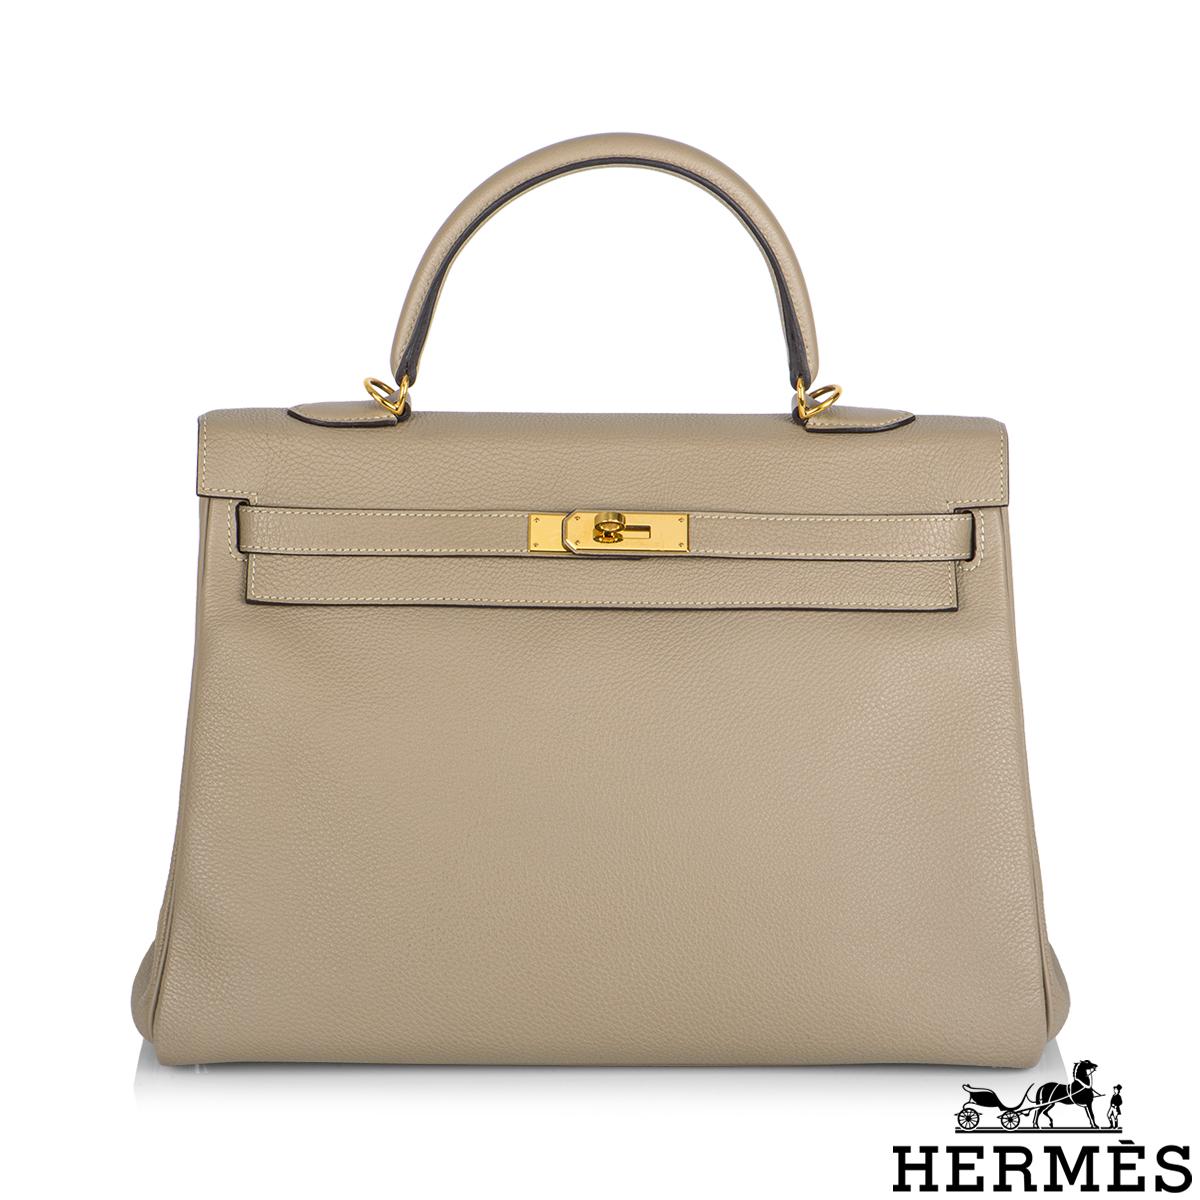 A beautiful Hermès Kelly II Retourne 35cm bag. The Gris Tourterelle Veau Togo leather bag is detailed with gold-tone hardware. The exterior of this Kelly features a front toggle closure, a single rolled top handle and tonal stitching. The interior